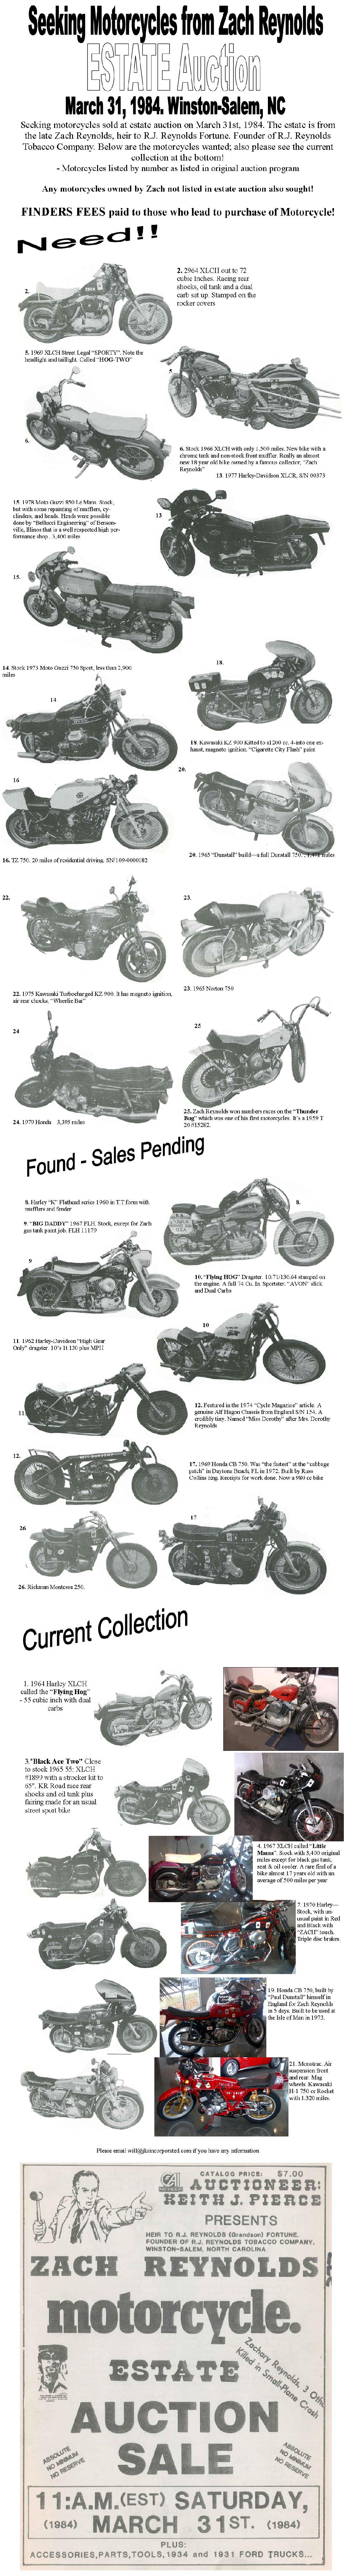 Zach Reynold's Motorcycle Collection